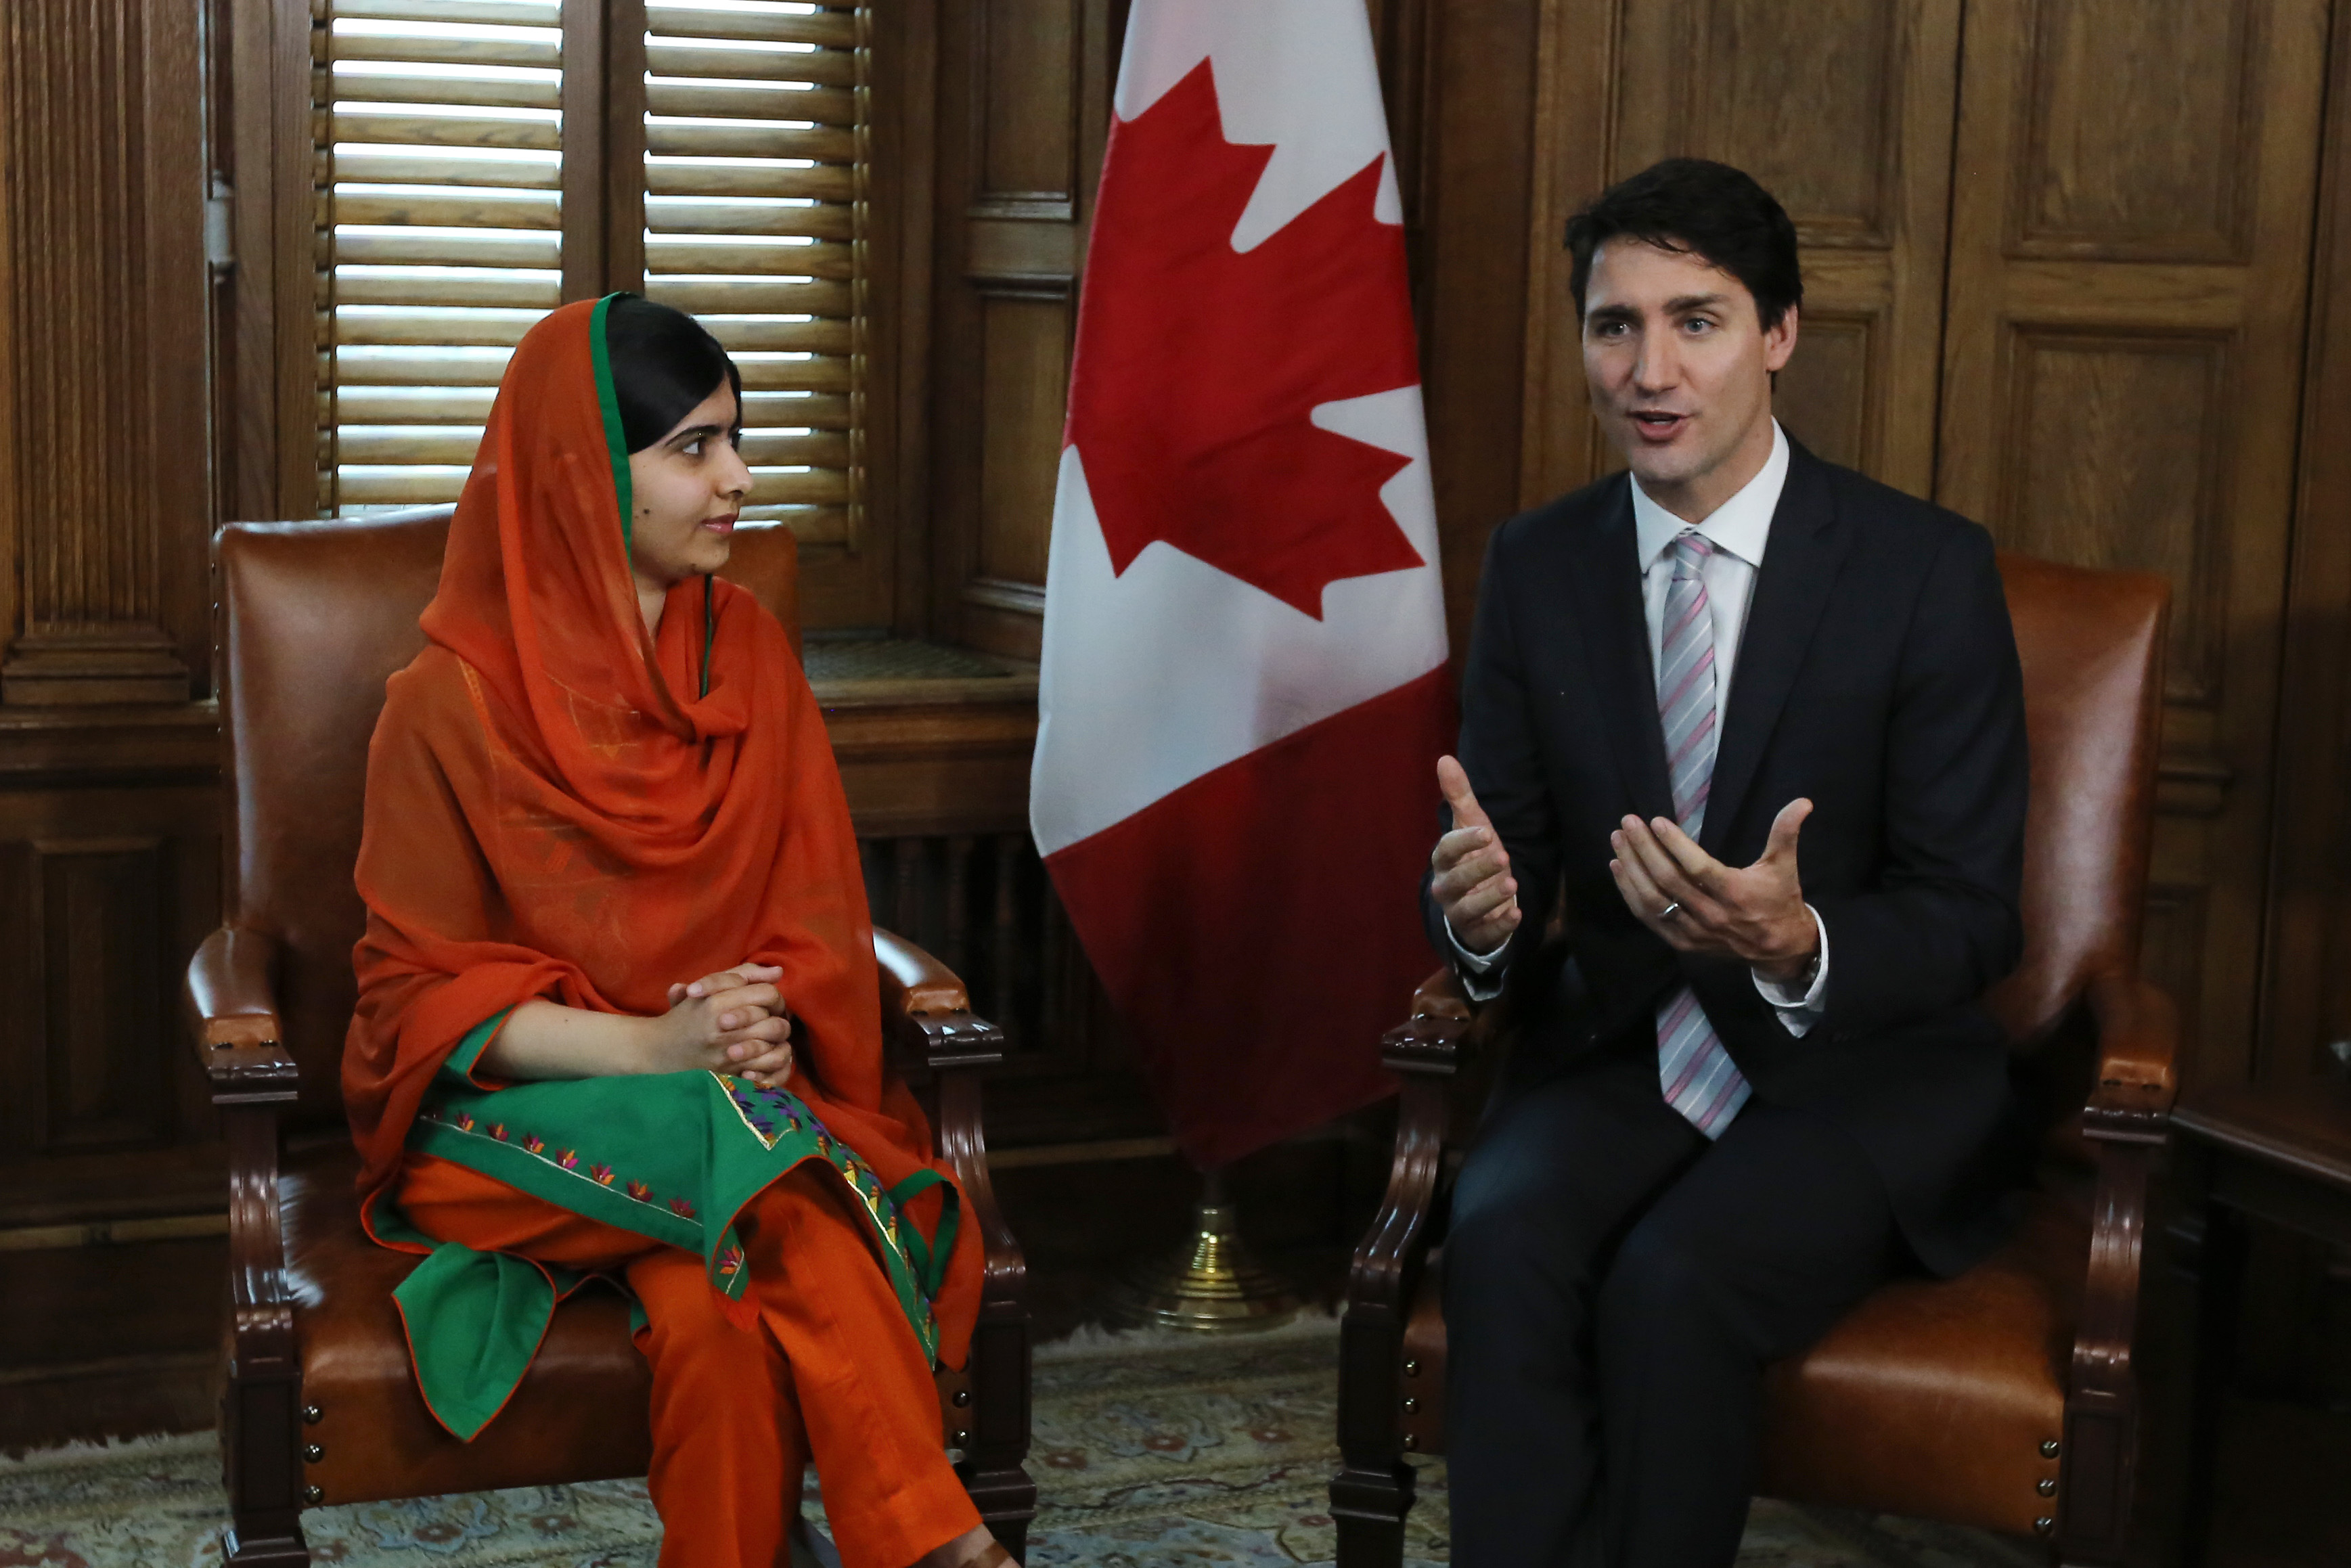 Malala Yousafzai speaks with Canadian Prime Minister Justin Trudeau in Trudeau's office on Parliament Hill in Ottawa, Ontario, April 12, 2017. (LARS HAGBERG—AFP/Getty Images)